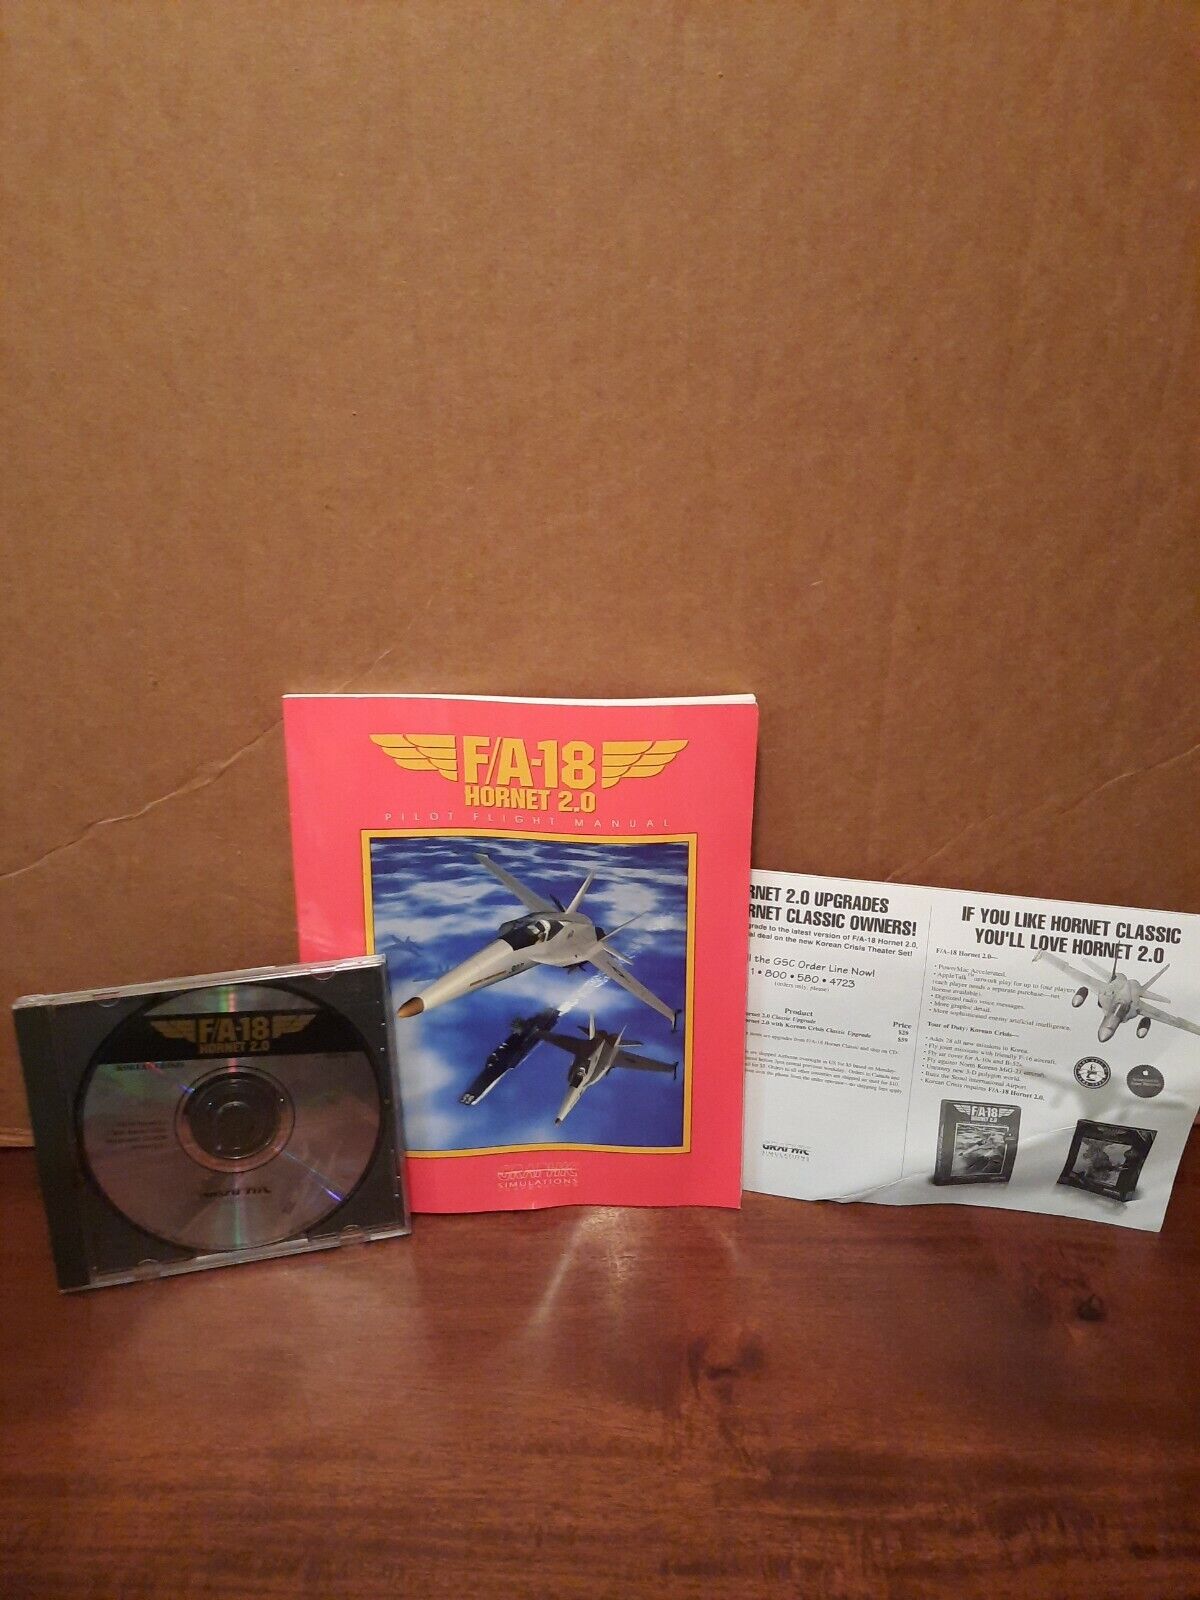 Vintage /A-18 Hornet 2.0 CD-ROM for Mac / Macintosh 1995 with flyer